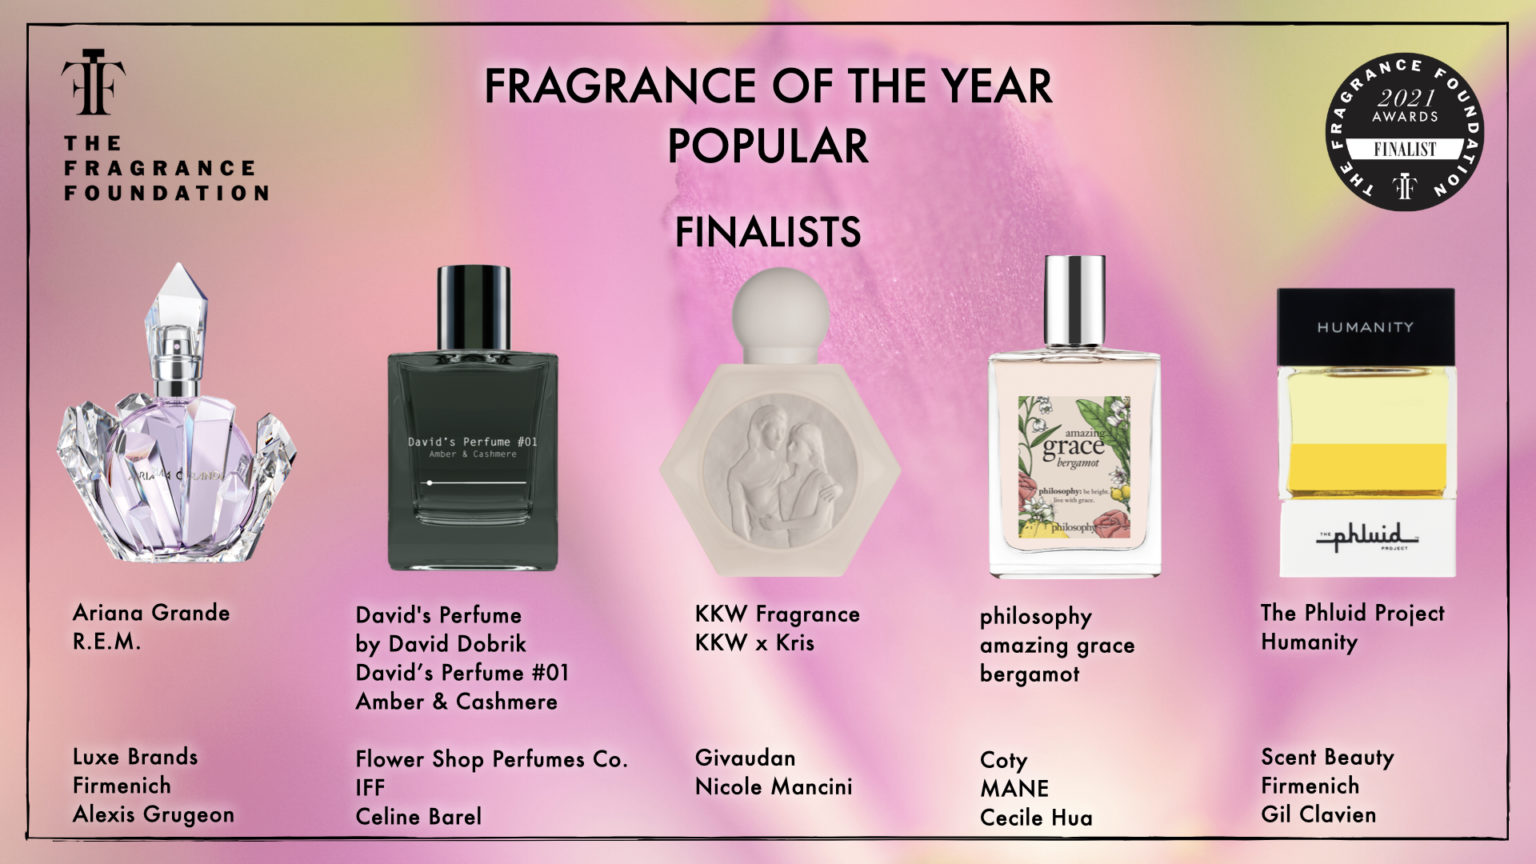 THE 2021 AWARDS FINALISTS’ WEBINAR APRIL 14th — The Fragrance Foundation